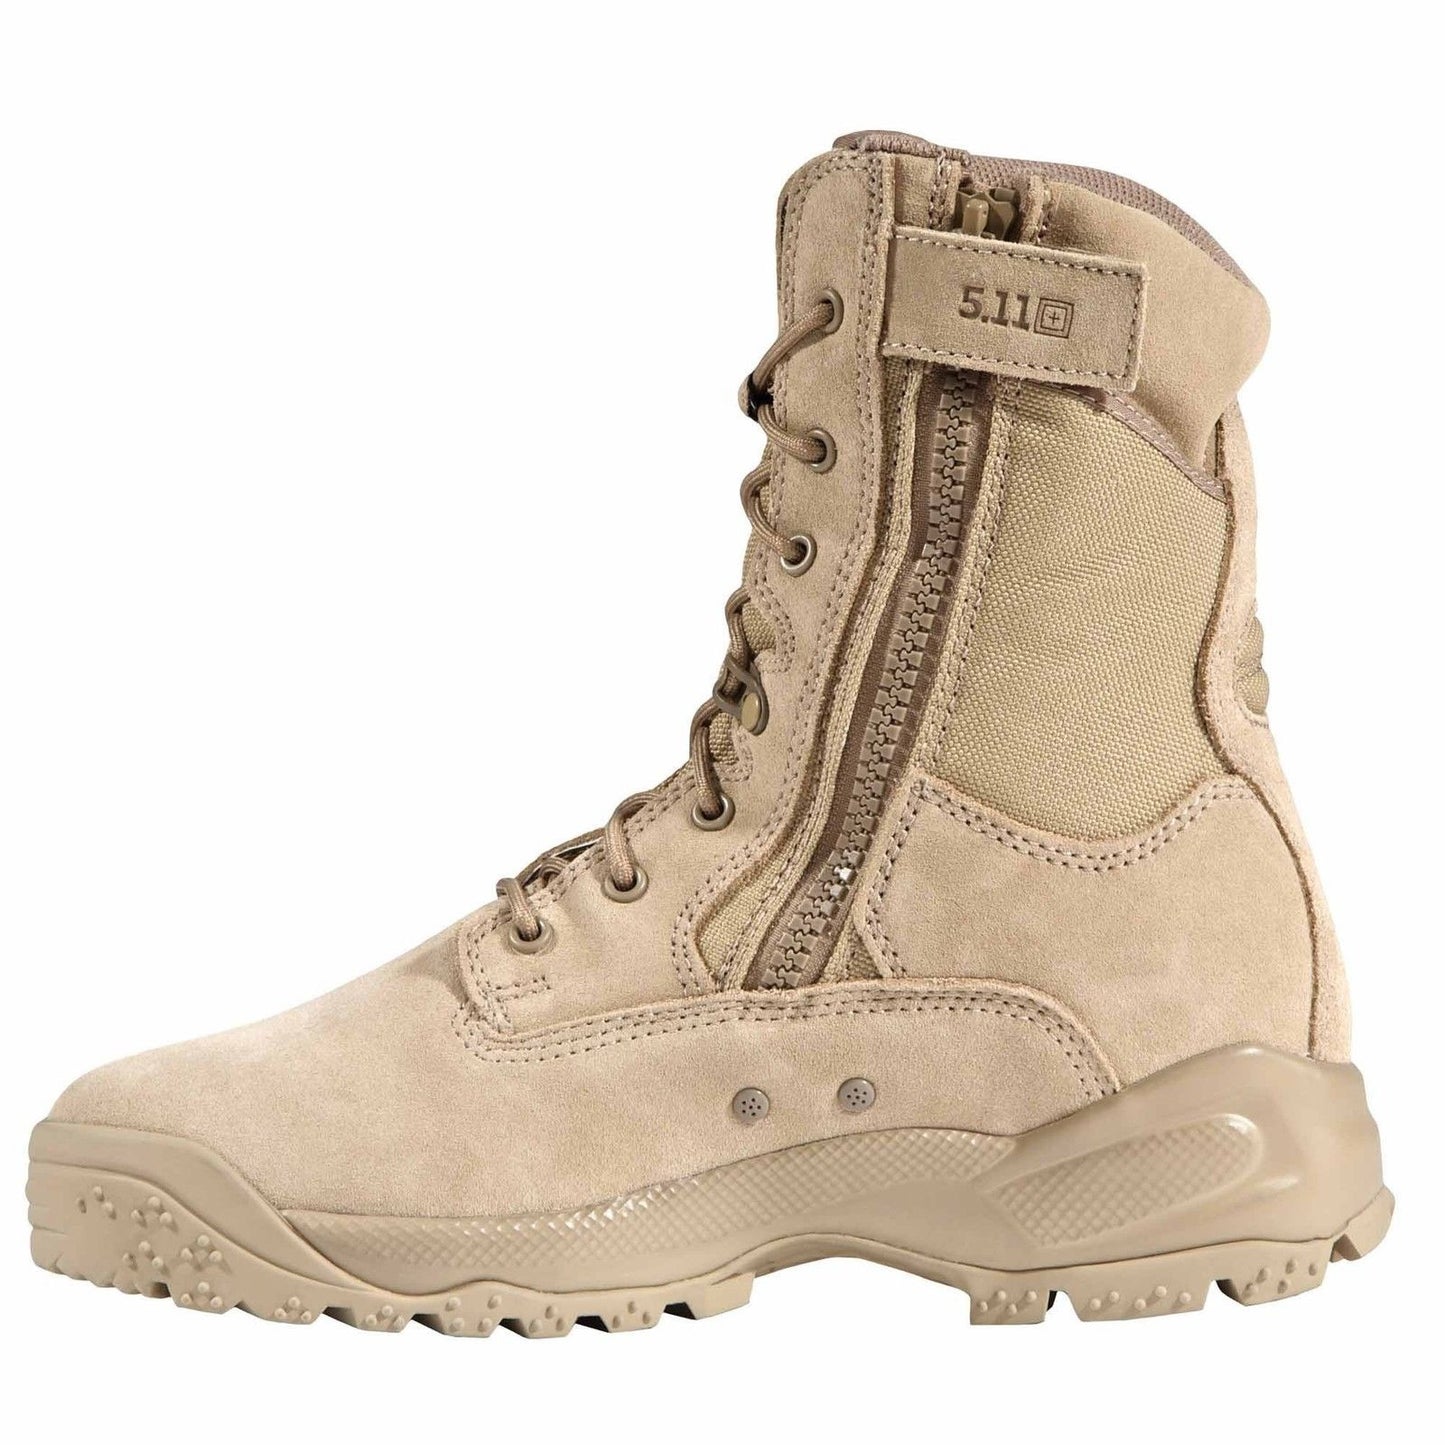 5.11 Mens ATAC 8" Coyote Tactical Boots - Tan Side Zip Field Duty Work Boot